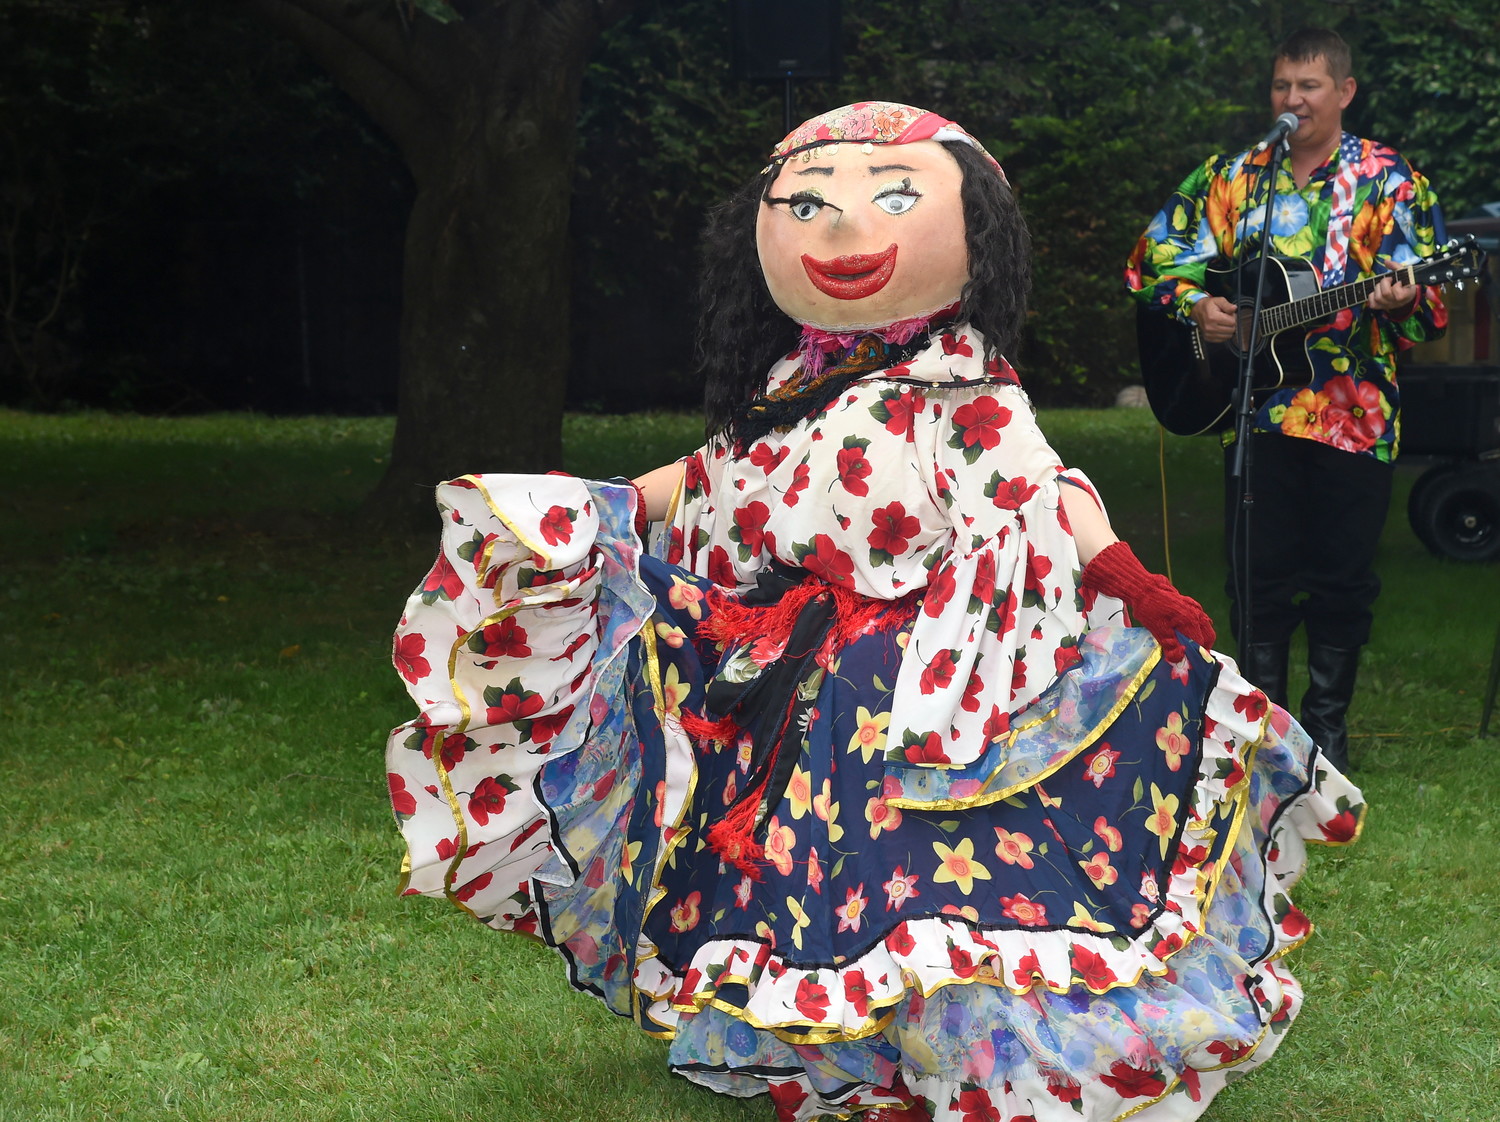 A dancing gypsy joined the Slavic group Barynya as they performed for a crowd at the Holy Trinity Orthodox Church’s annual food and music festival.